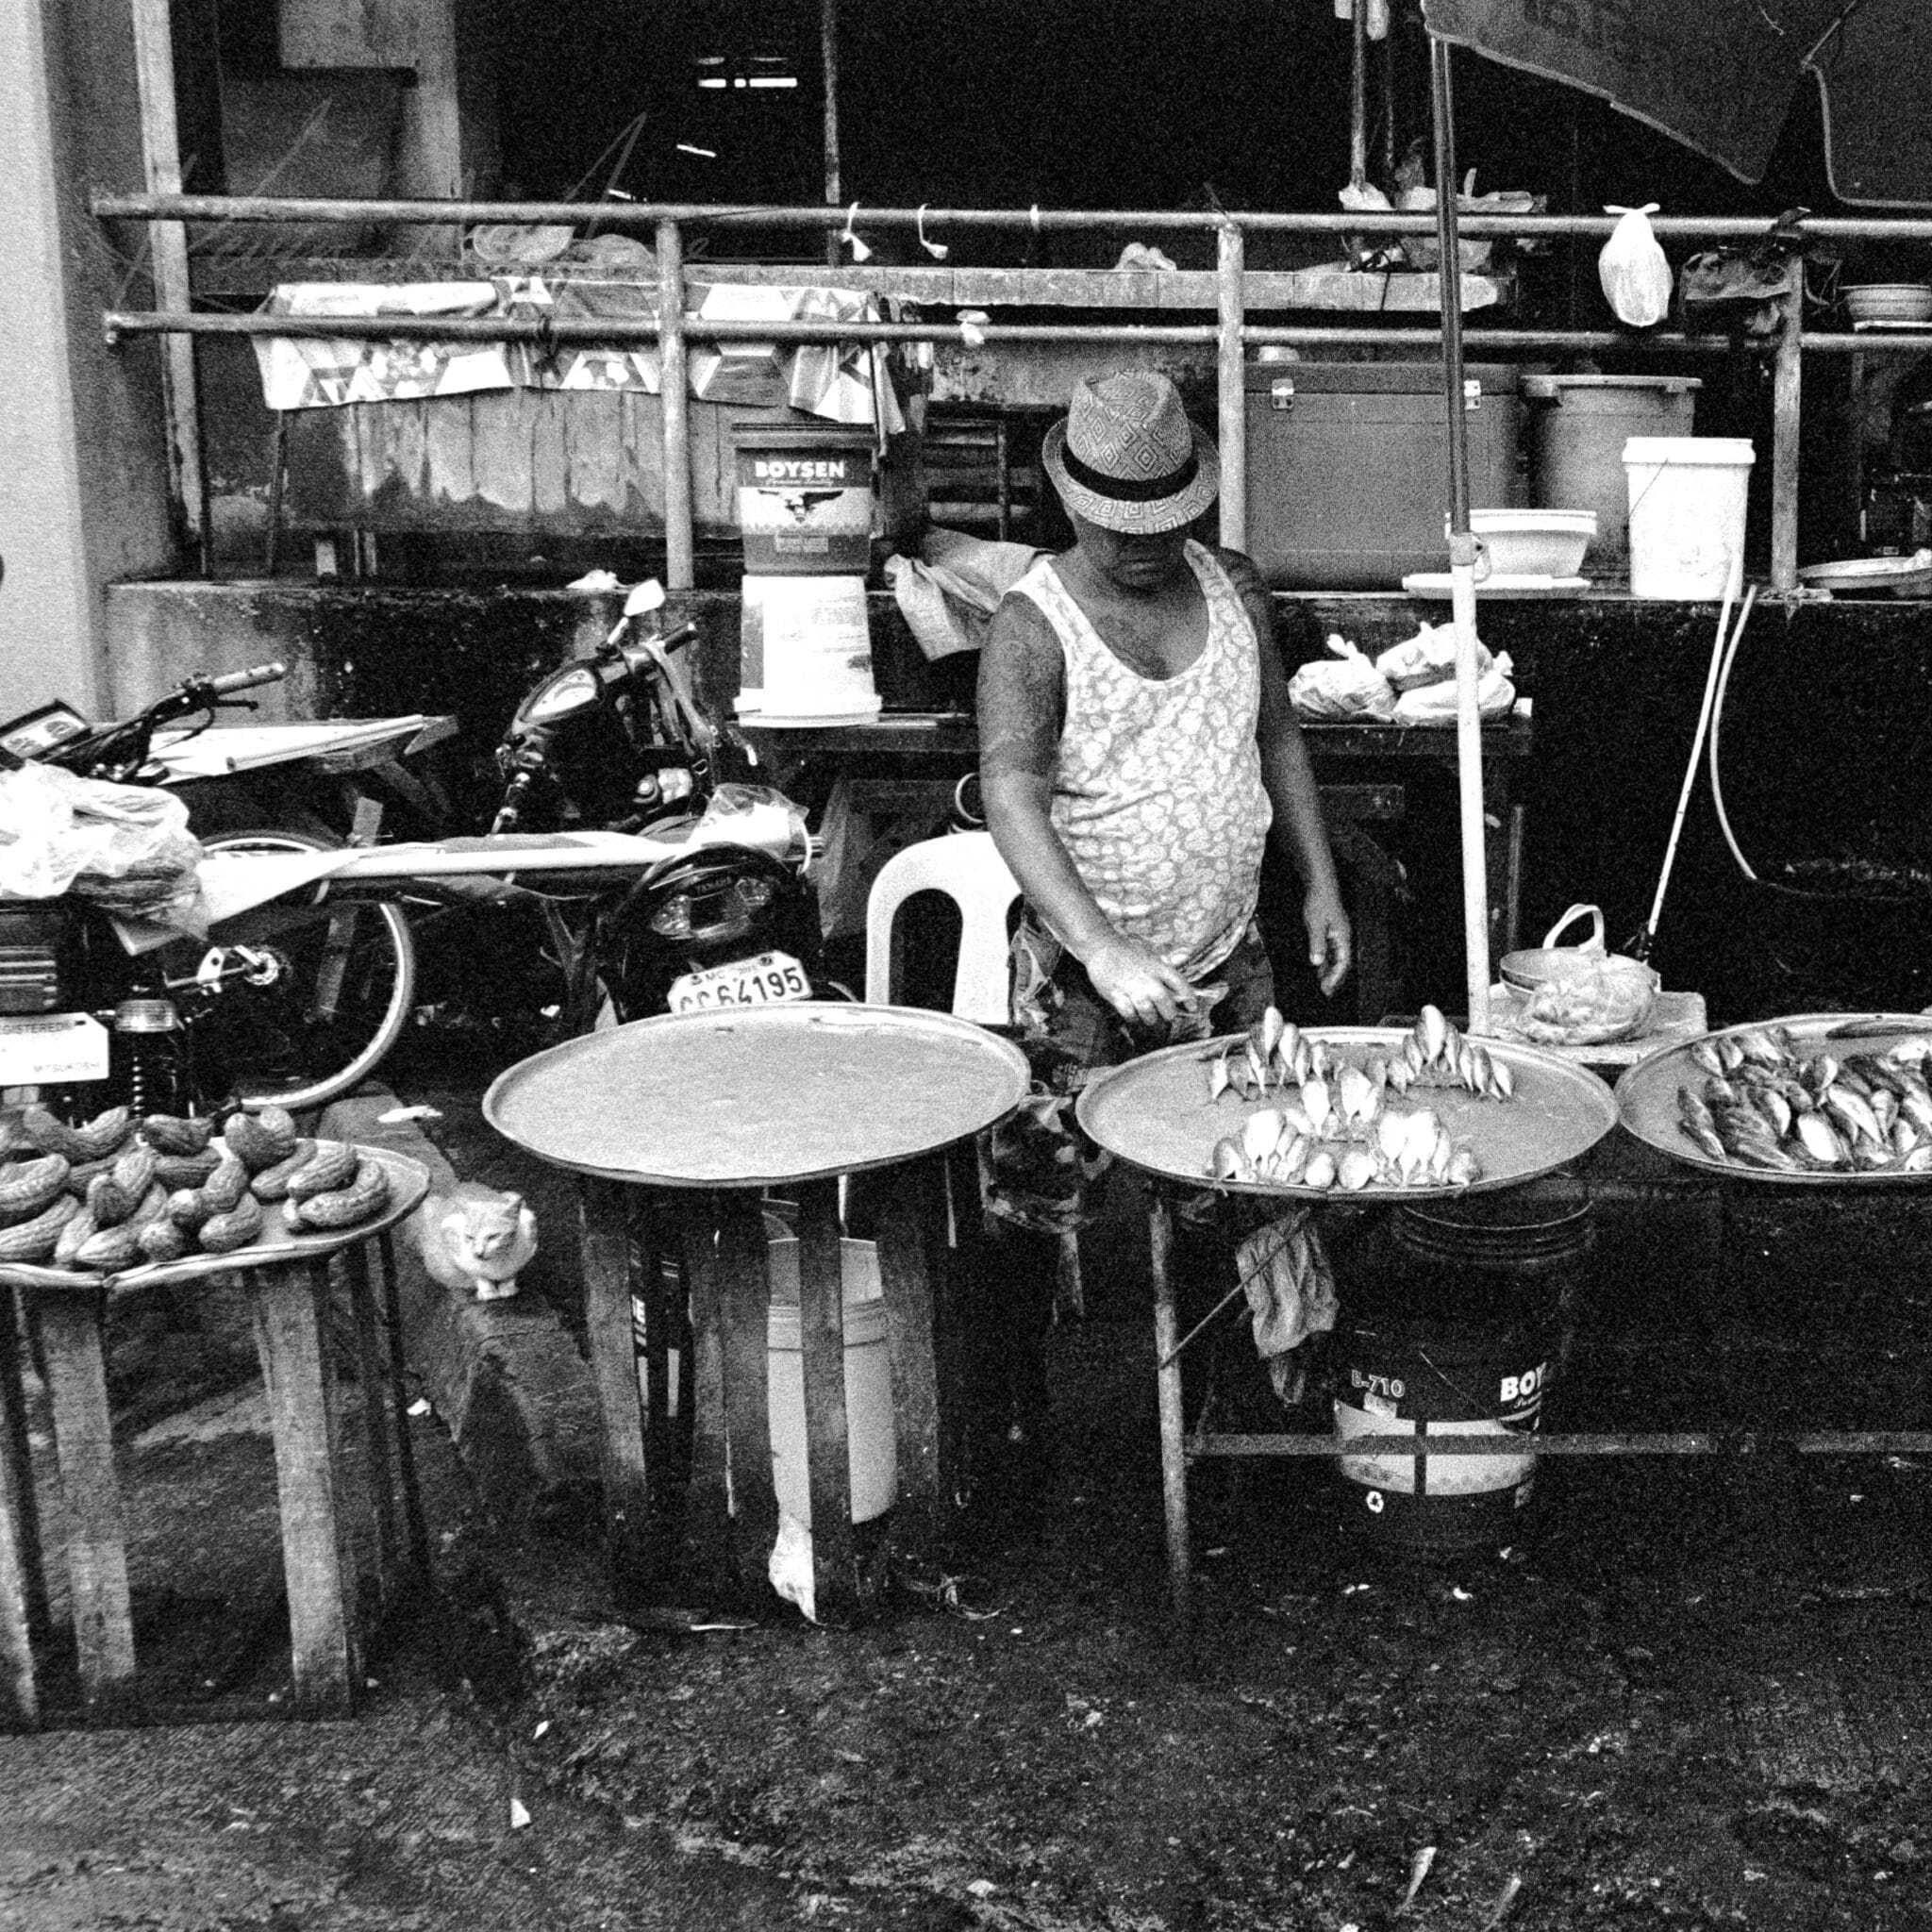 Local vendor preparing food at a traditional outdoor market stall.